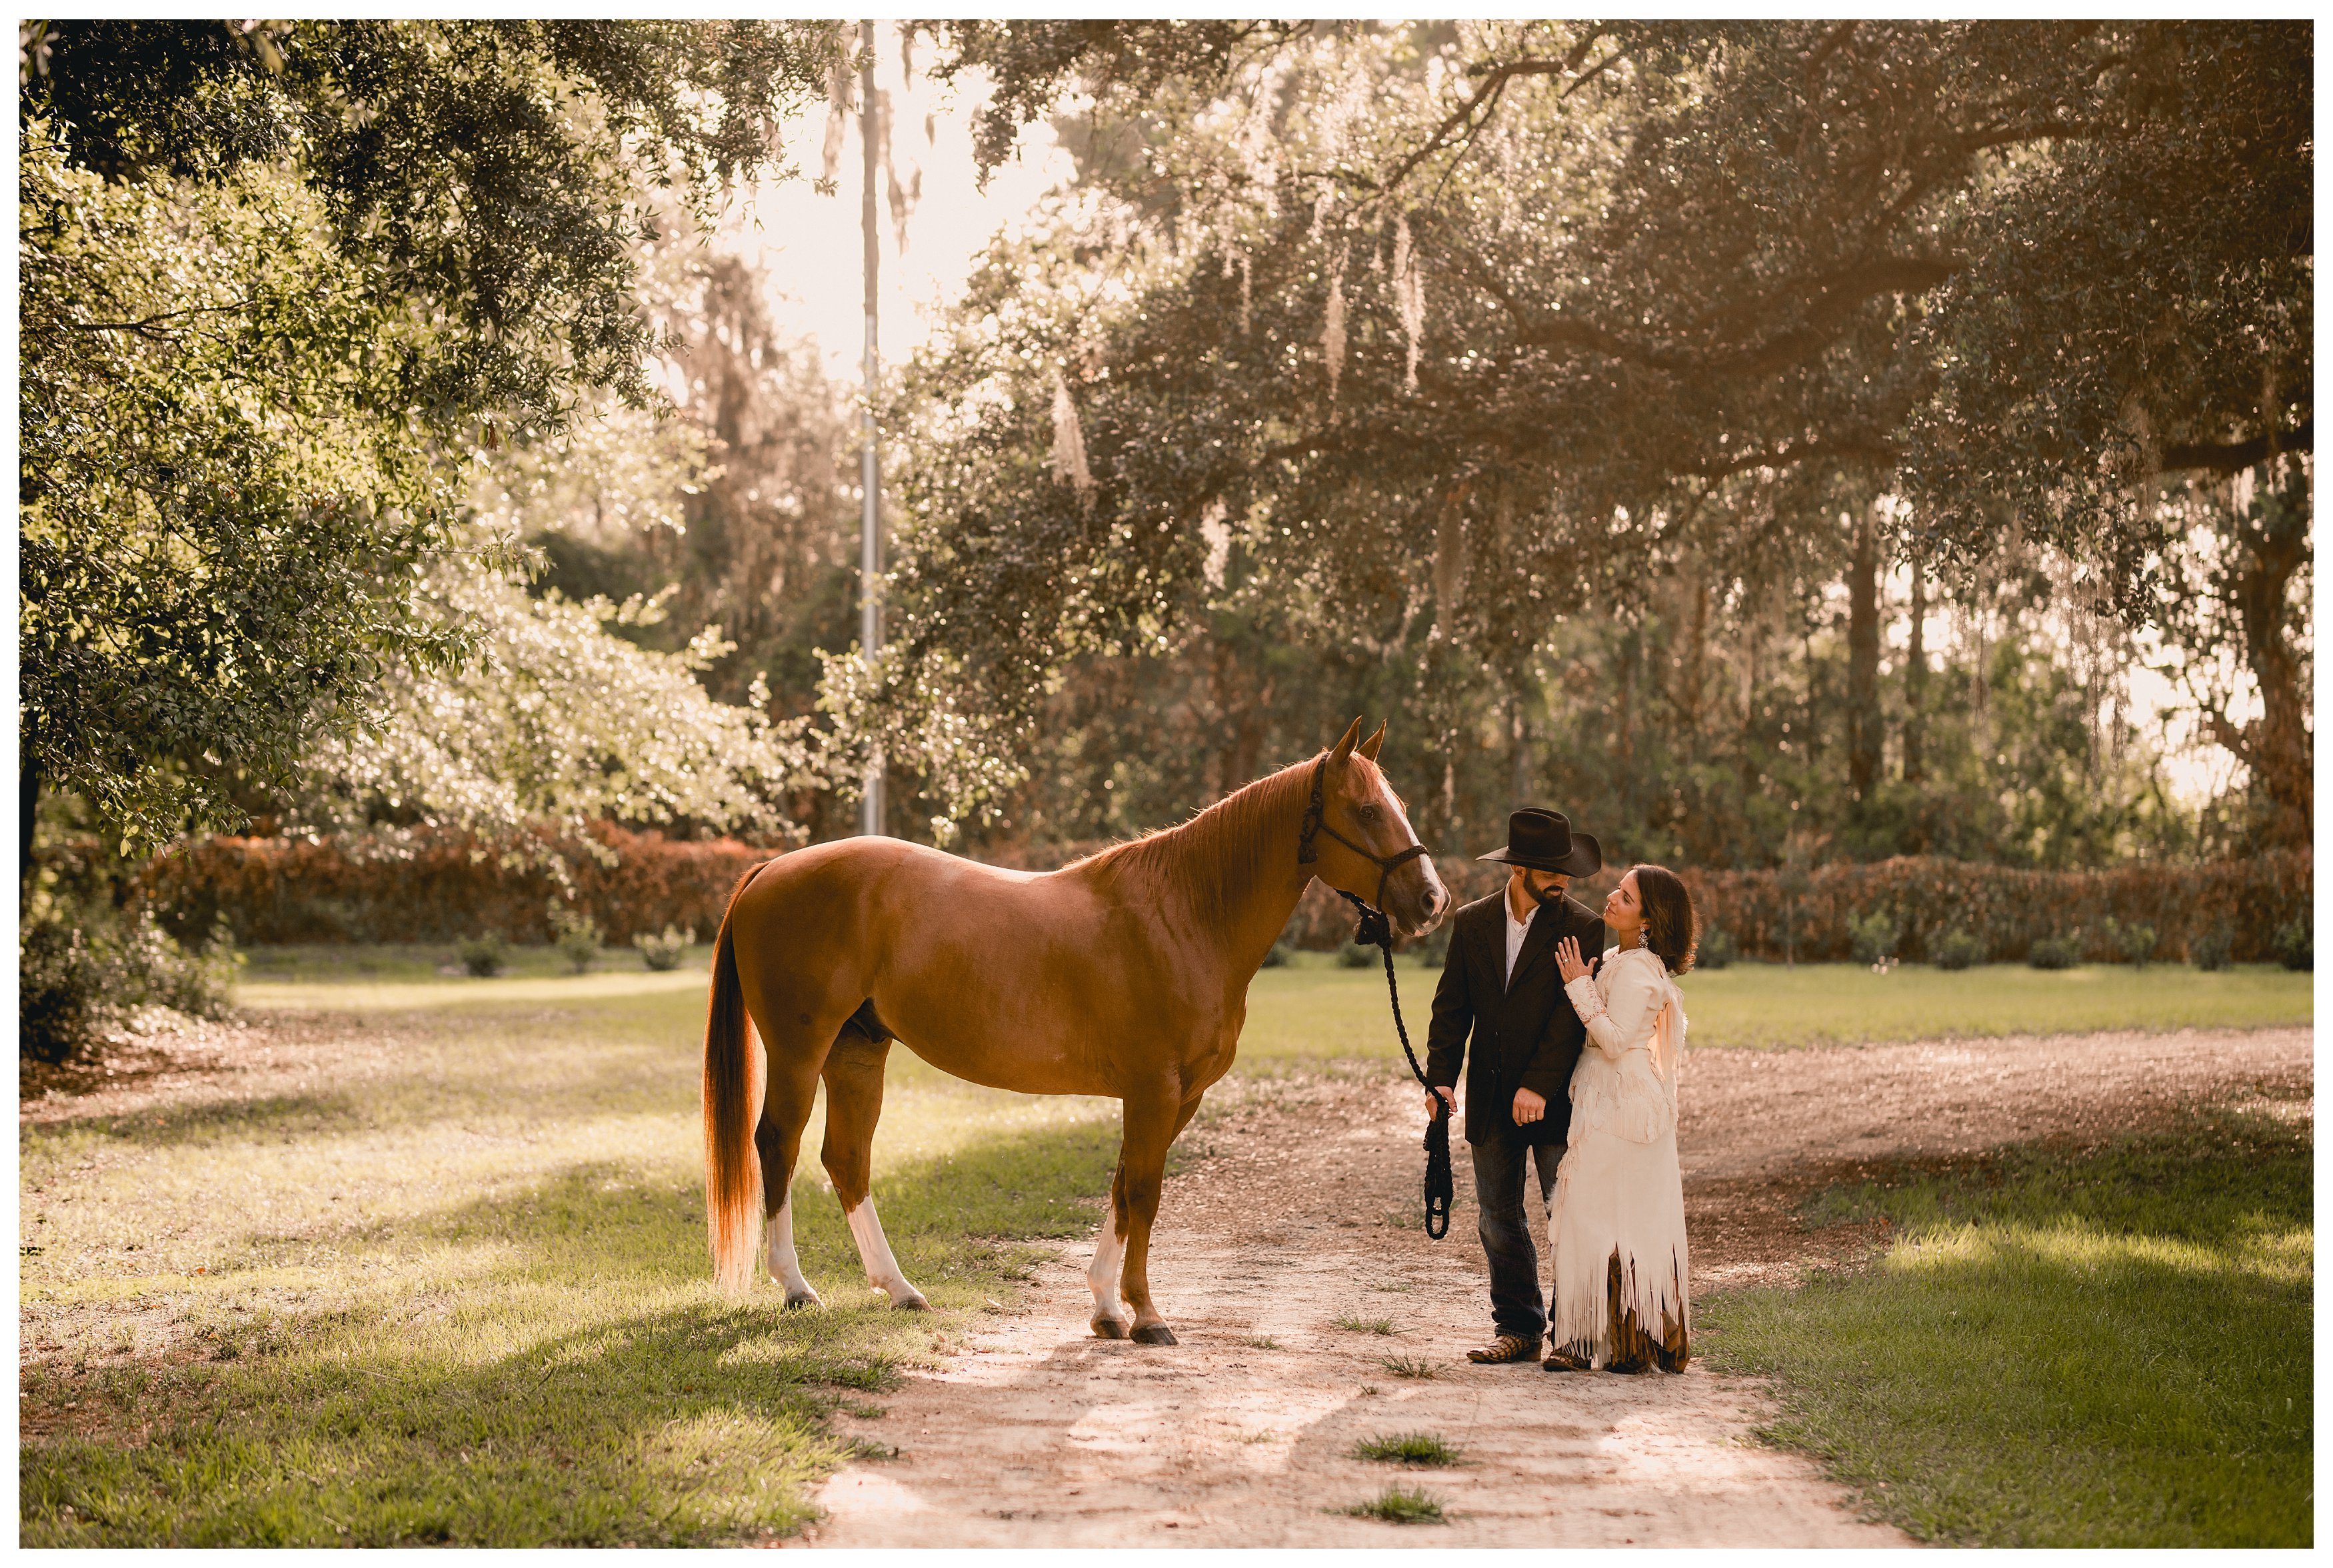 Beautiful scenery for a western couple session taken in Gainesville, Florida. The canopy trees are brilliant.